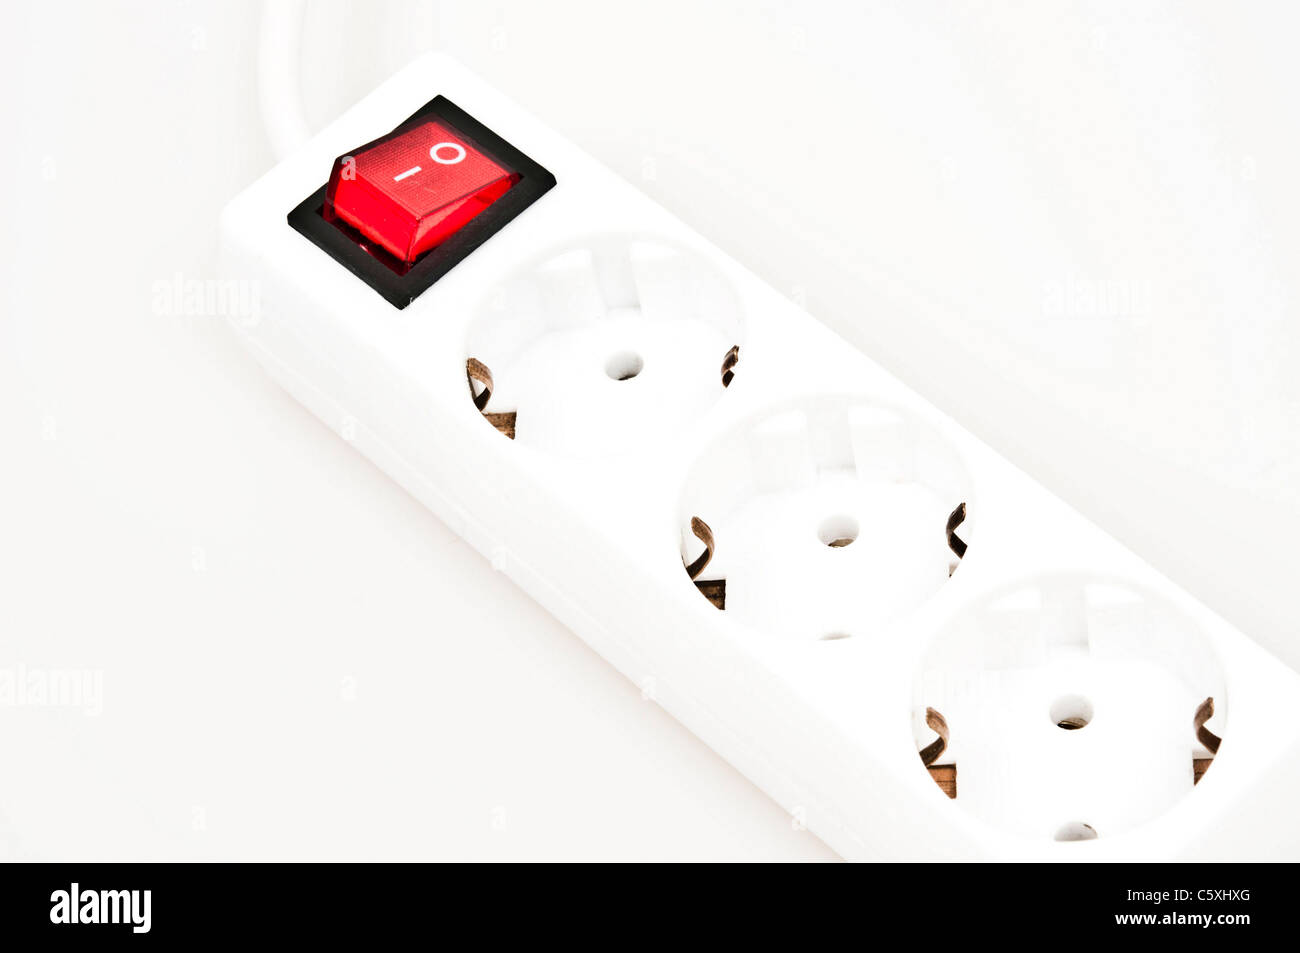 Isolated power outlet with red button Stock Photo